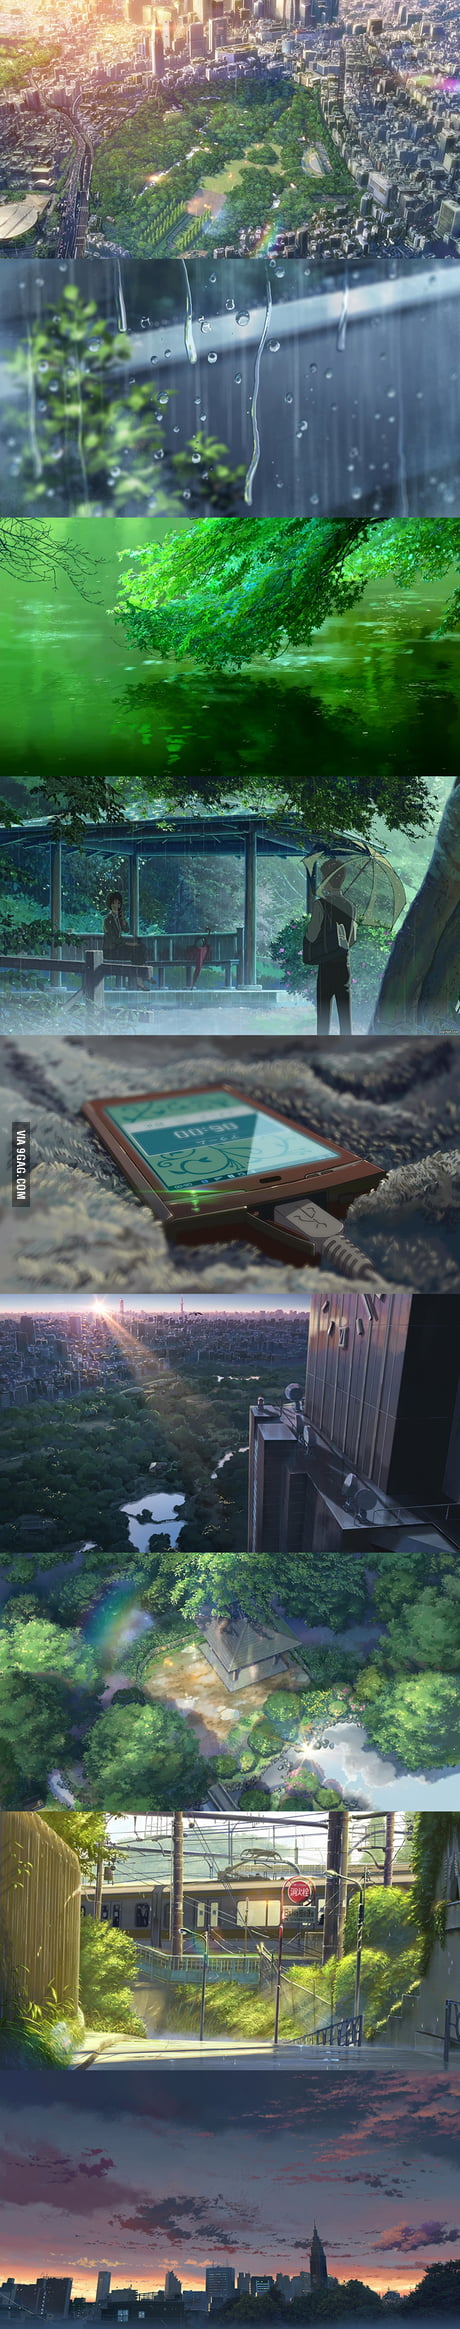 The Amazing Visuals Of Garden Of Words Anime Movie 9gag